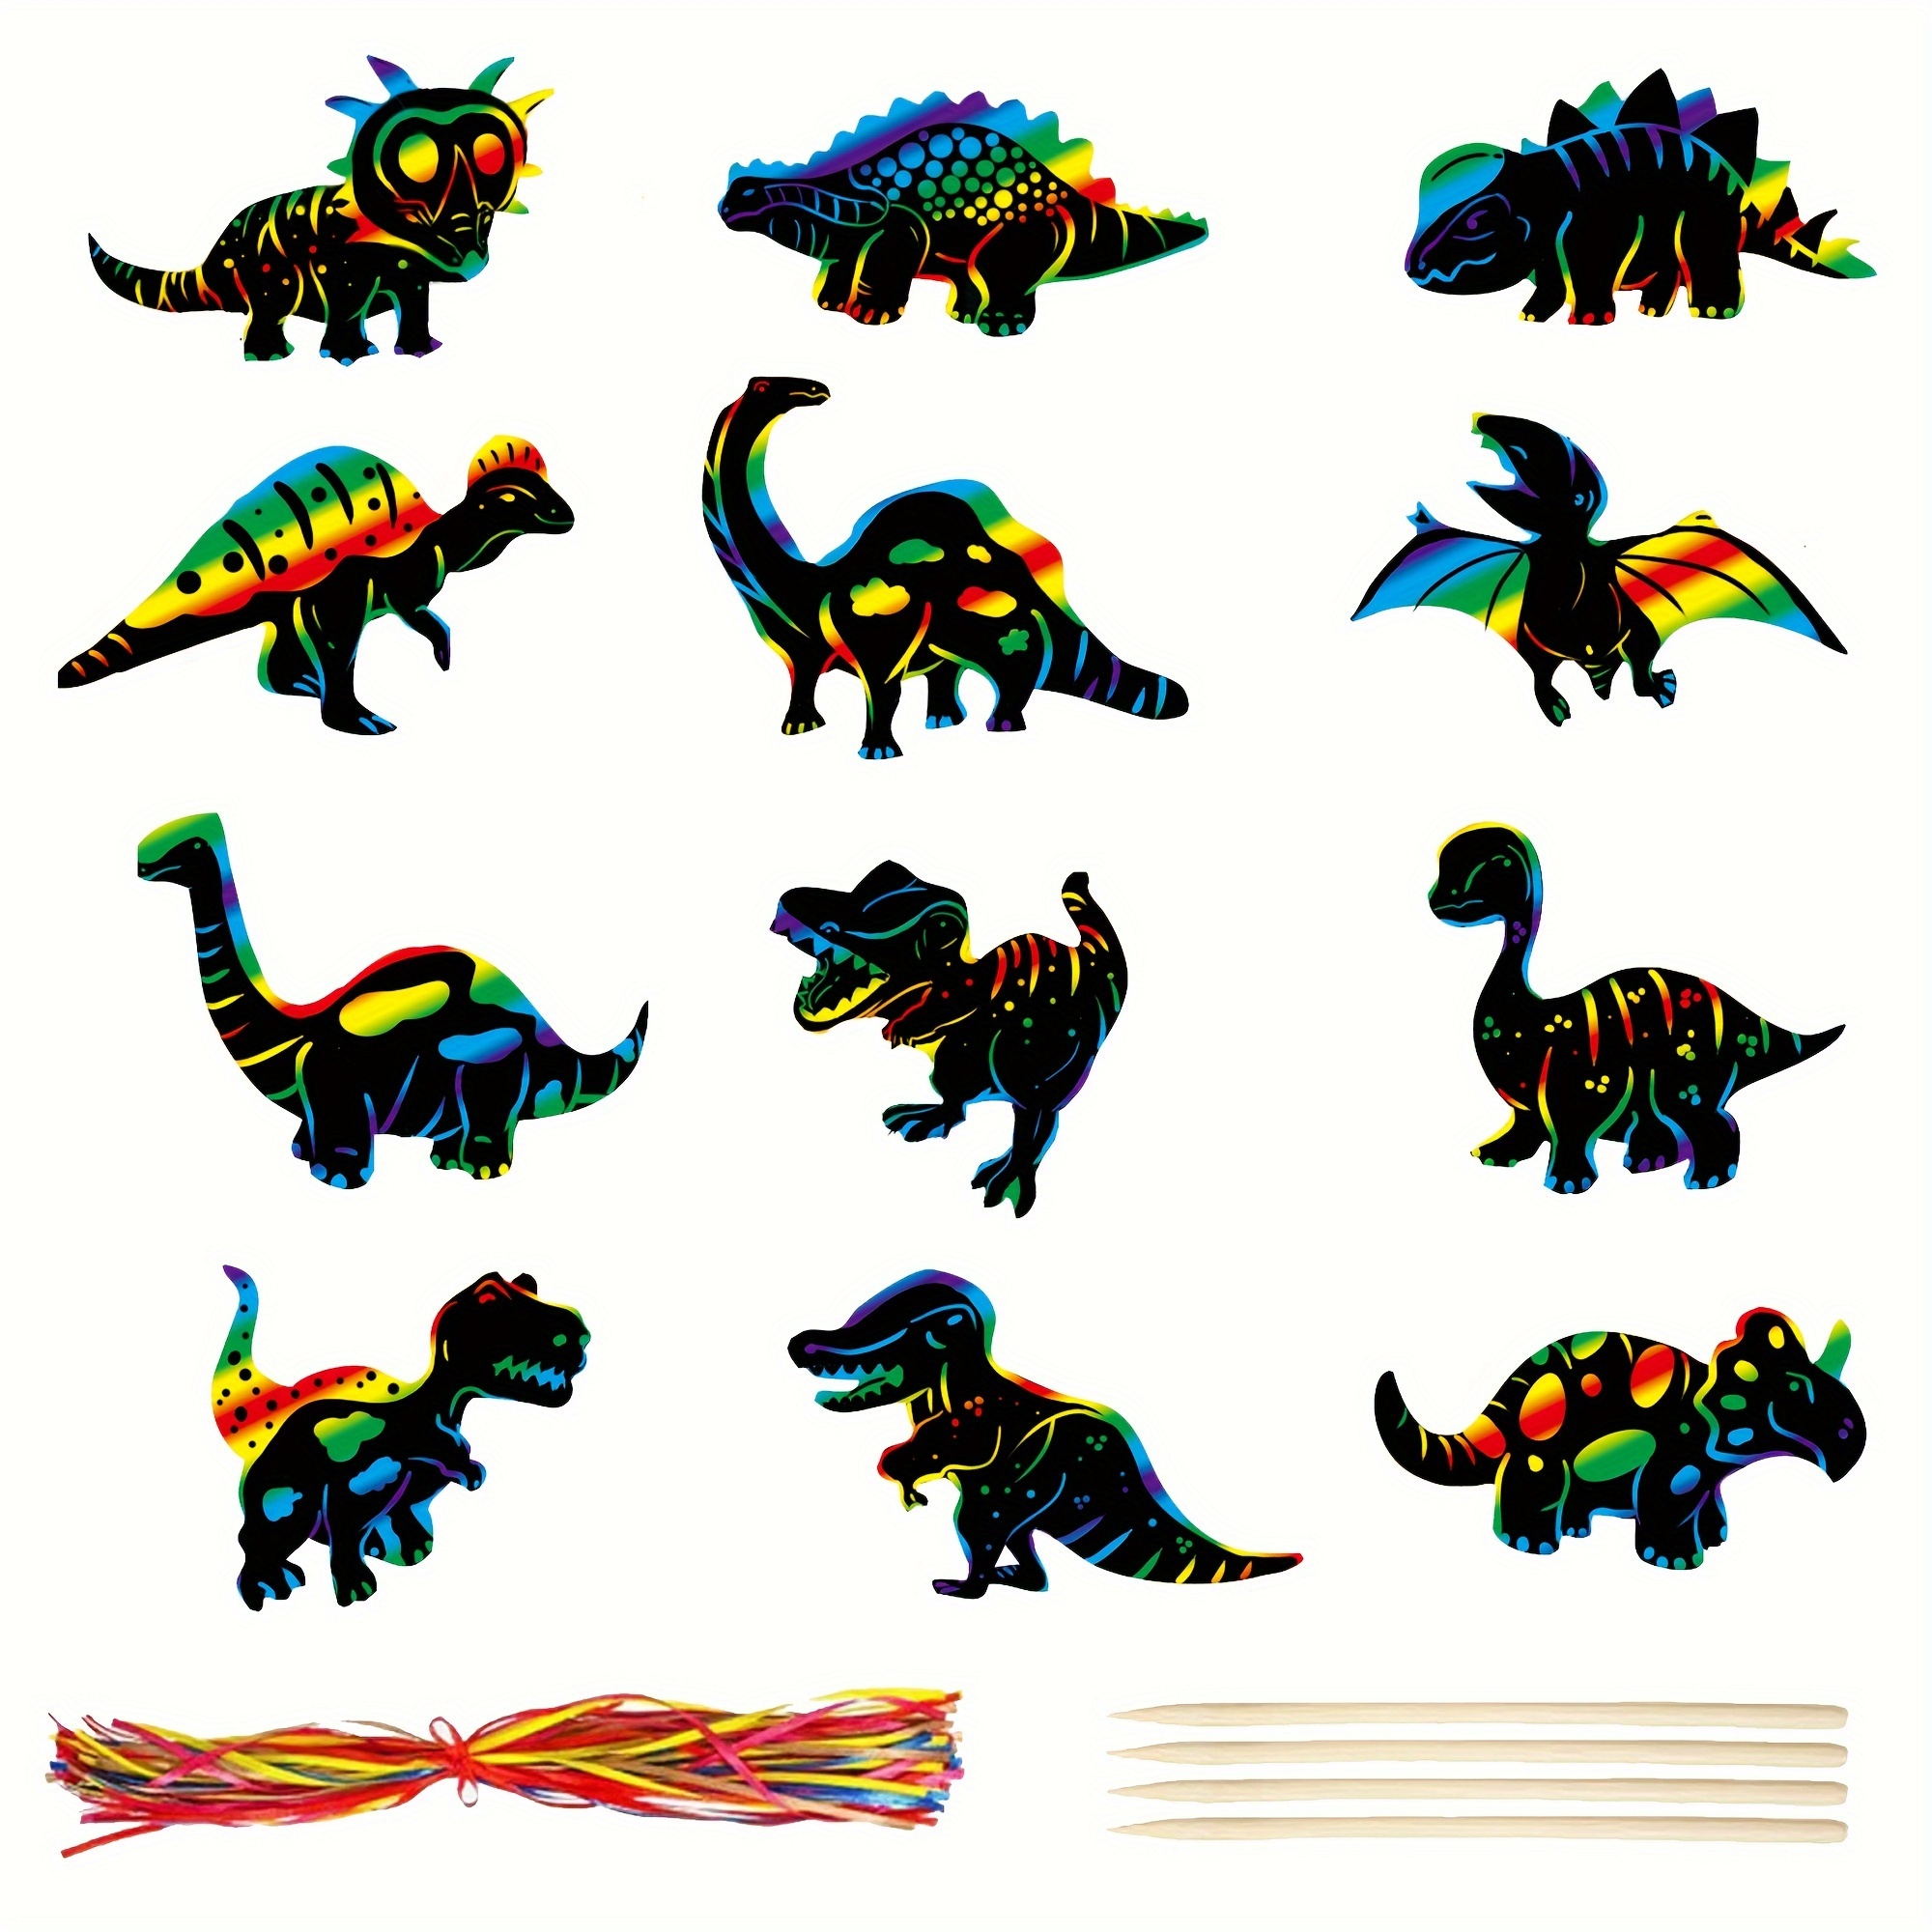 

48 Pcs Dinosaur Scratch Art Set - Rainbow Scratch Paper Kit With Wooden Styluses & Ribbons For Dinosaur Party Games And Room Decor - Creative Craft Activity For Kids